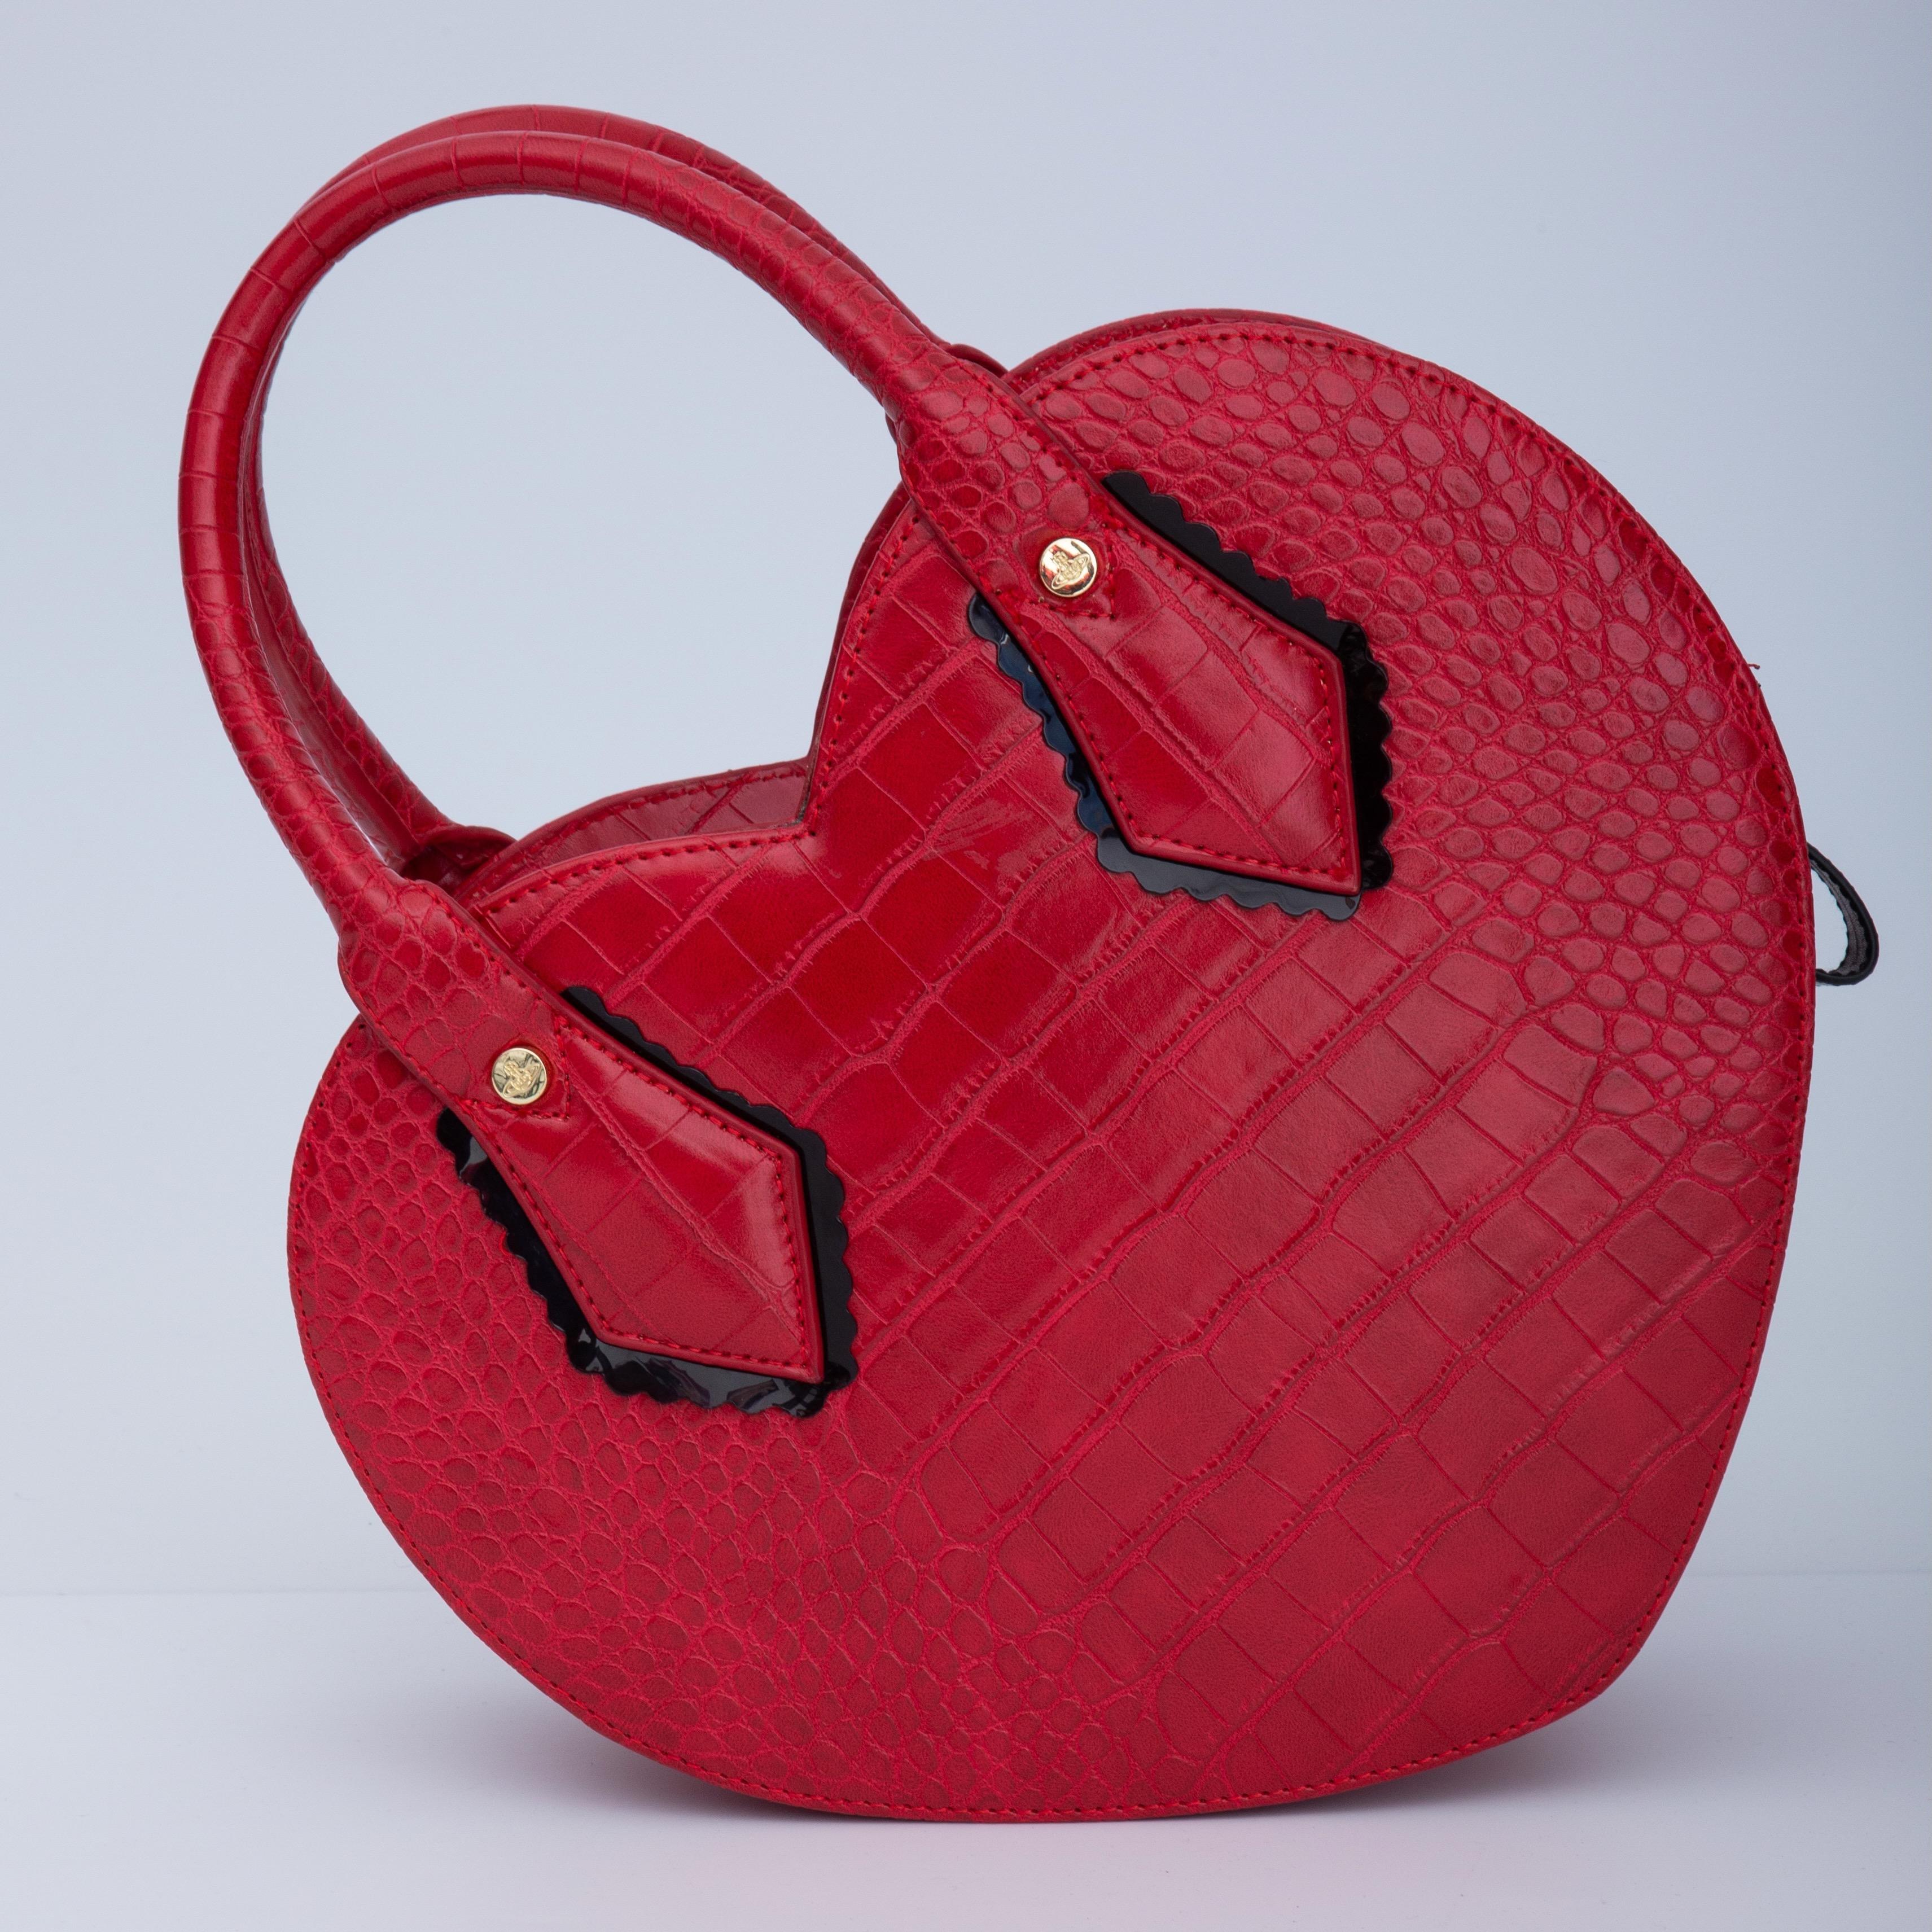 COLOR: Red
MATERIAL: Leather
MEASURES: H 9” x L 5.11” x D 3.5”
DROP: 5.5”
CONDITION: Very good - faint hairline scratches form handling. Minimal signs of wear.